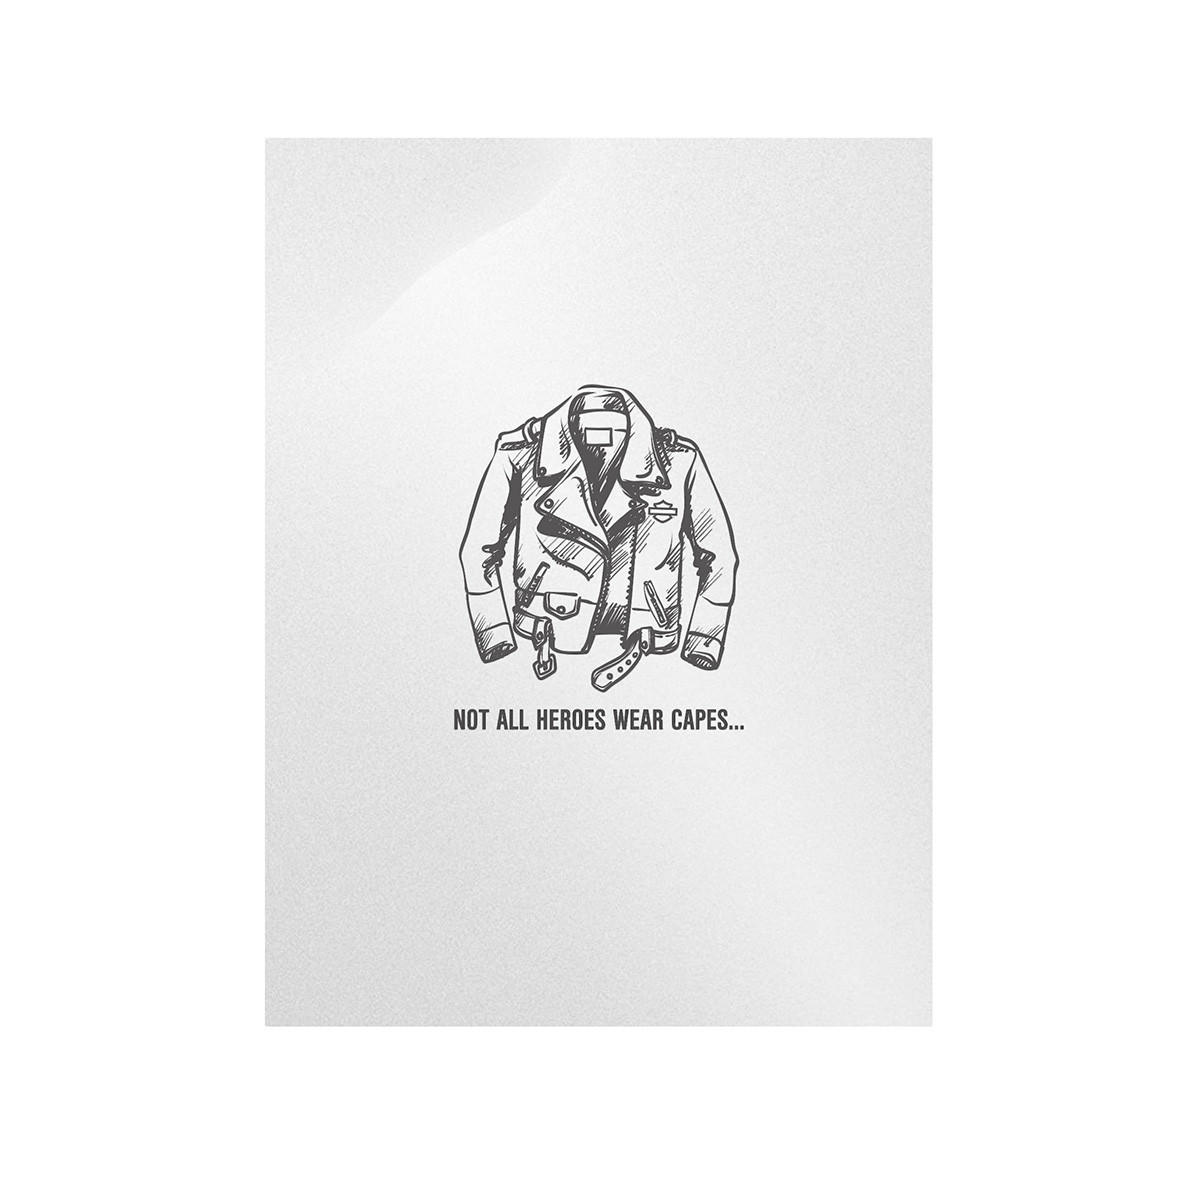 HARLEY DAVIDSON NOT ALL HEROES WEAR CAPES – FATHER’S DAY CARD